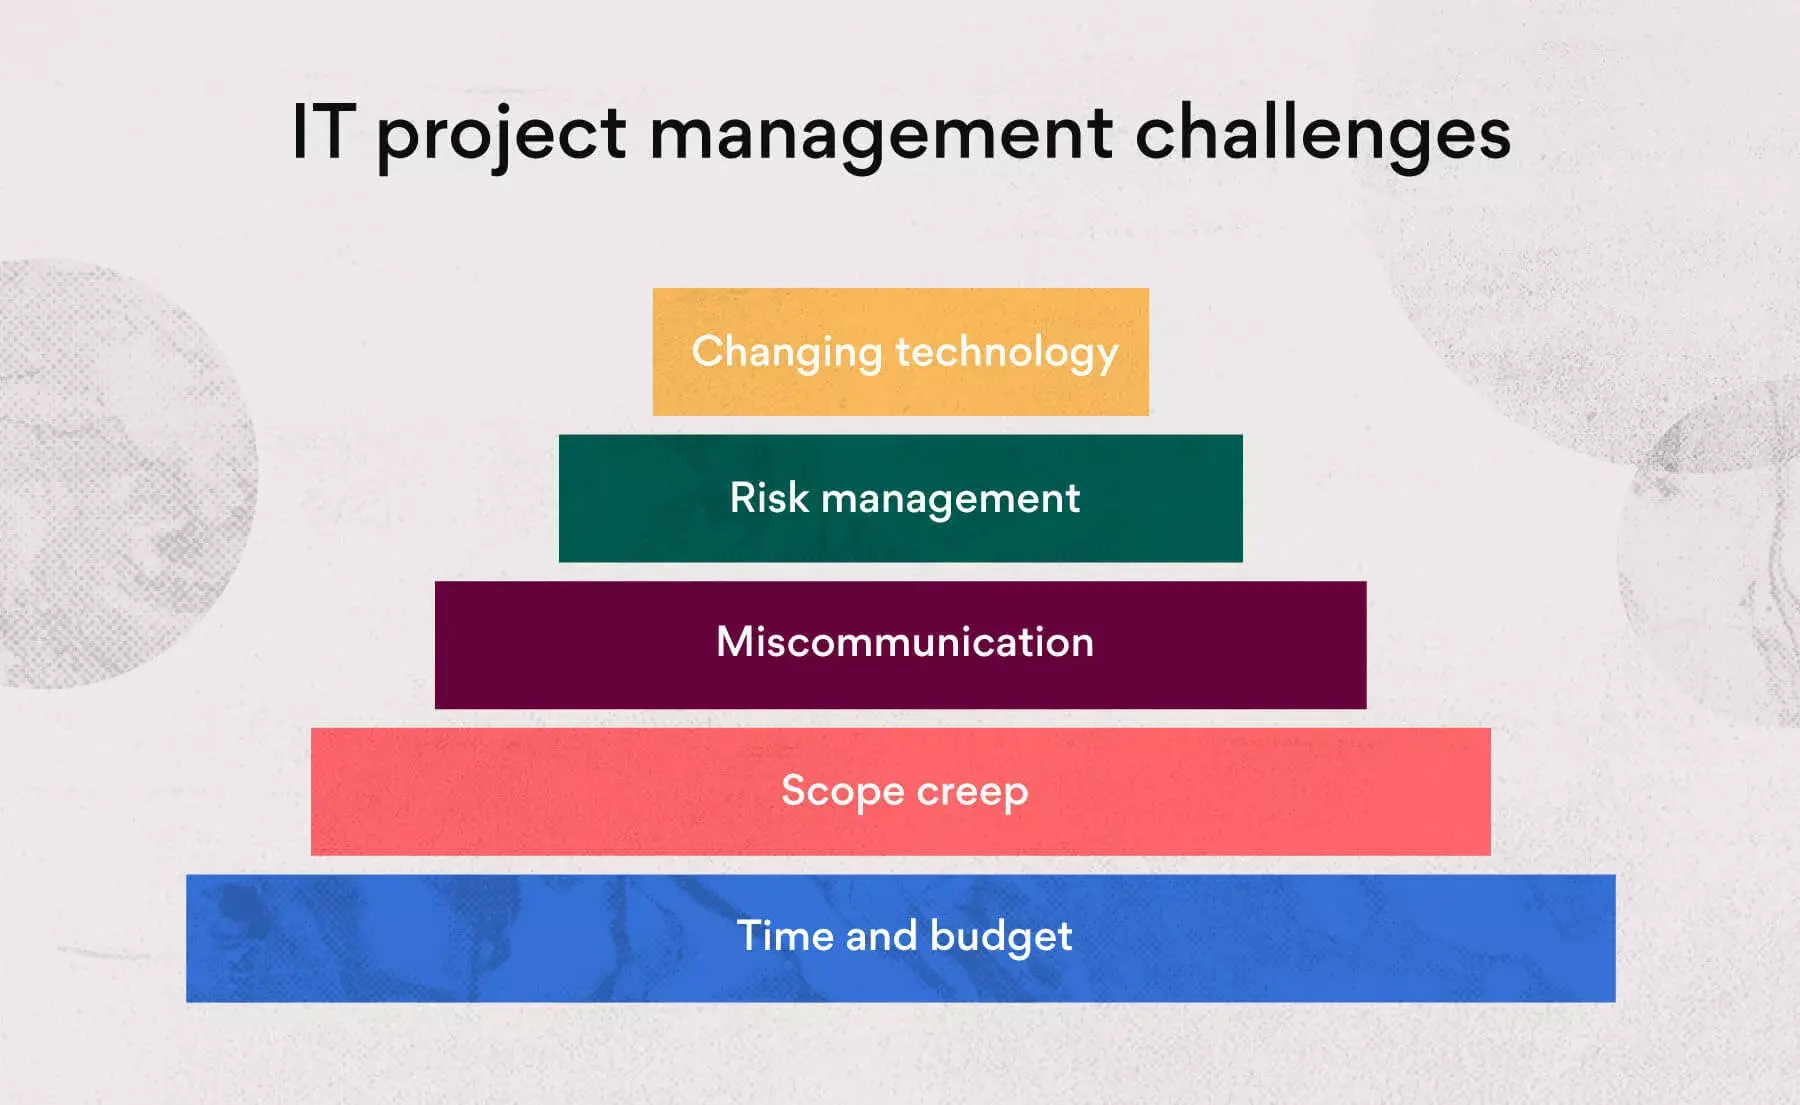 [inline illustration] Challenges faced by IT project managers (infographic)